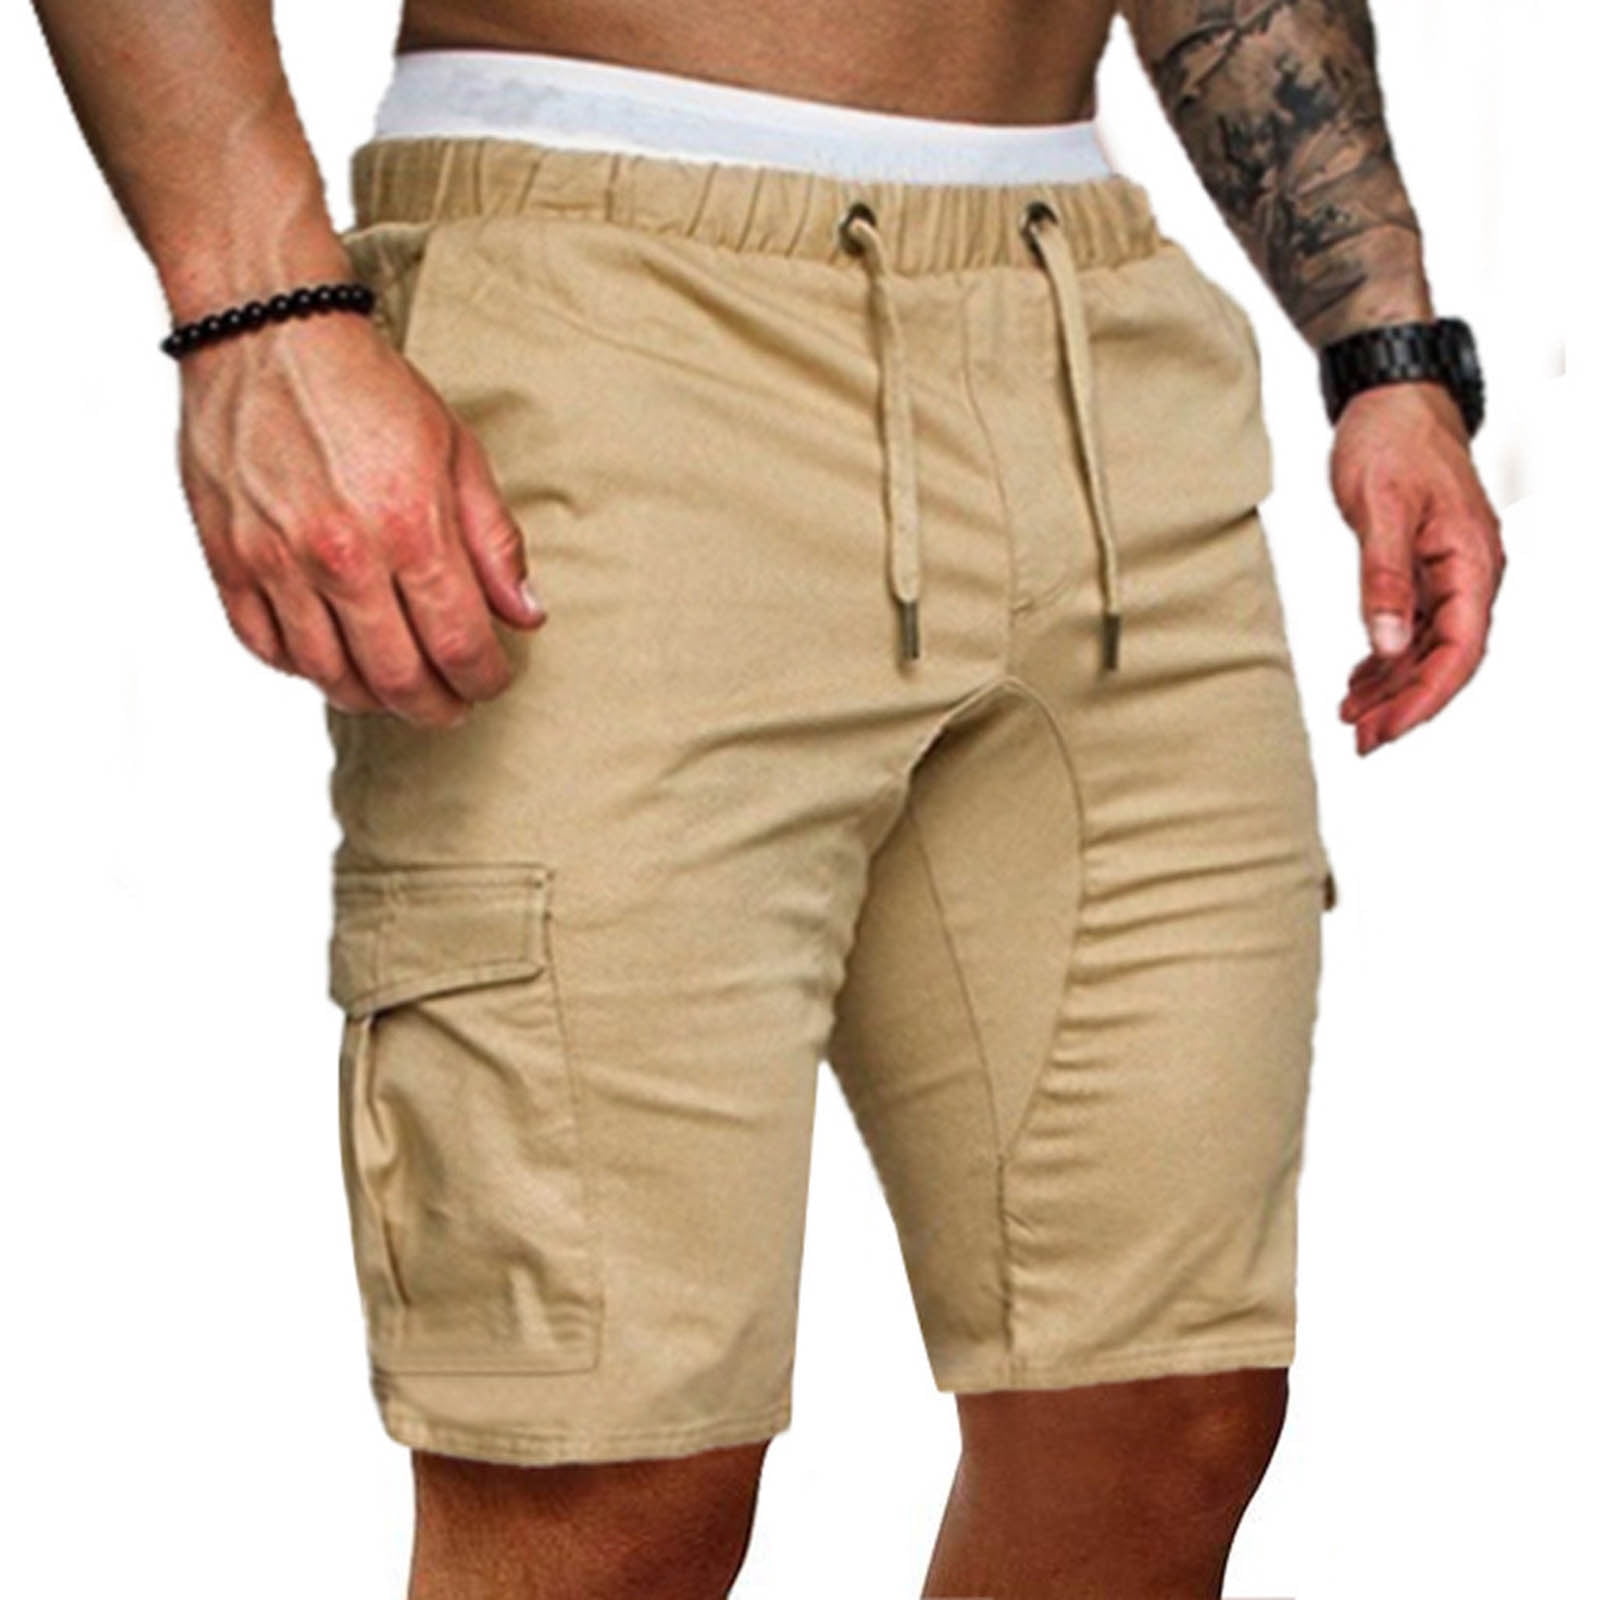 Lolmot Men's Twill Cargo Shorts with Multi Pockets, Plus Size Loose Fit ...